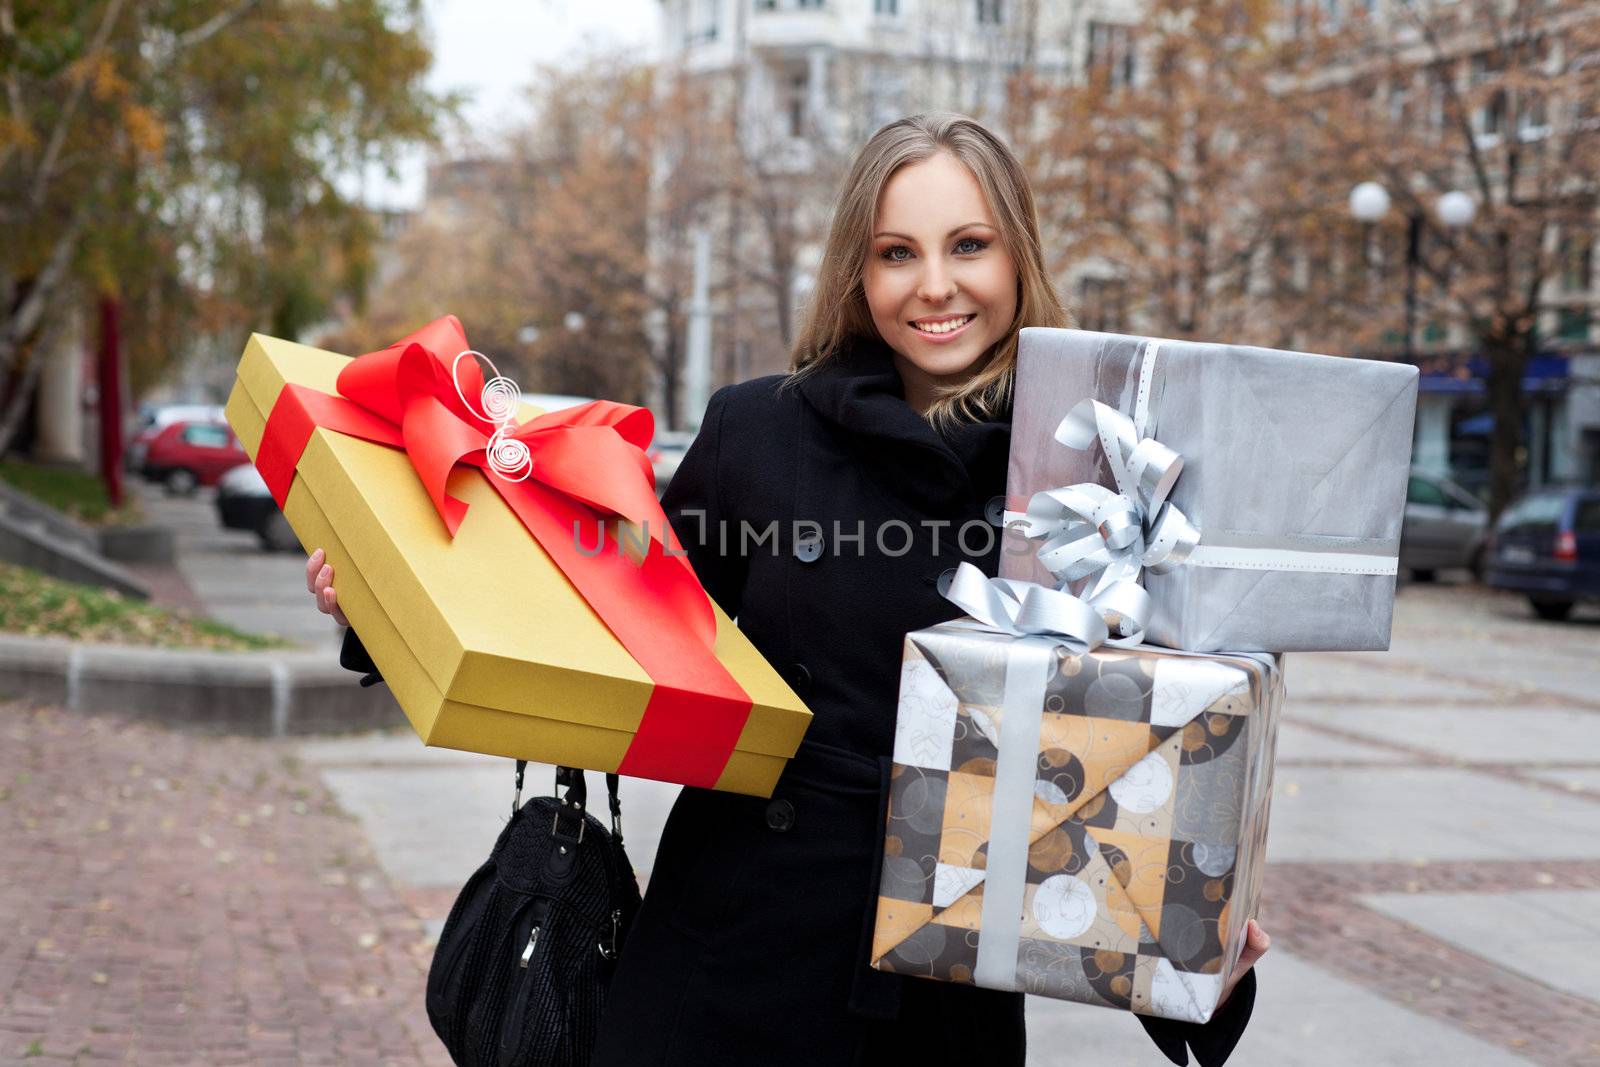 Beautiful smiling woman in the street holding presents, looking at camera